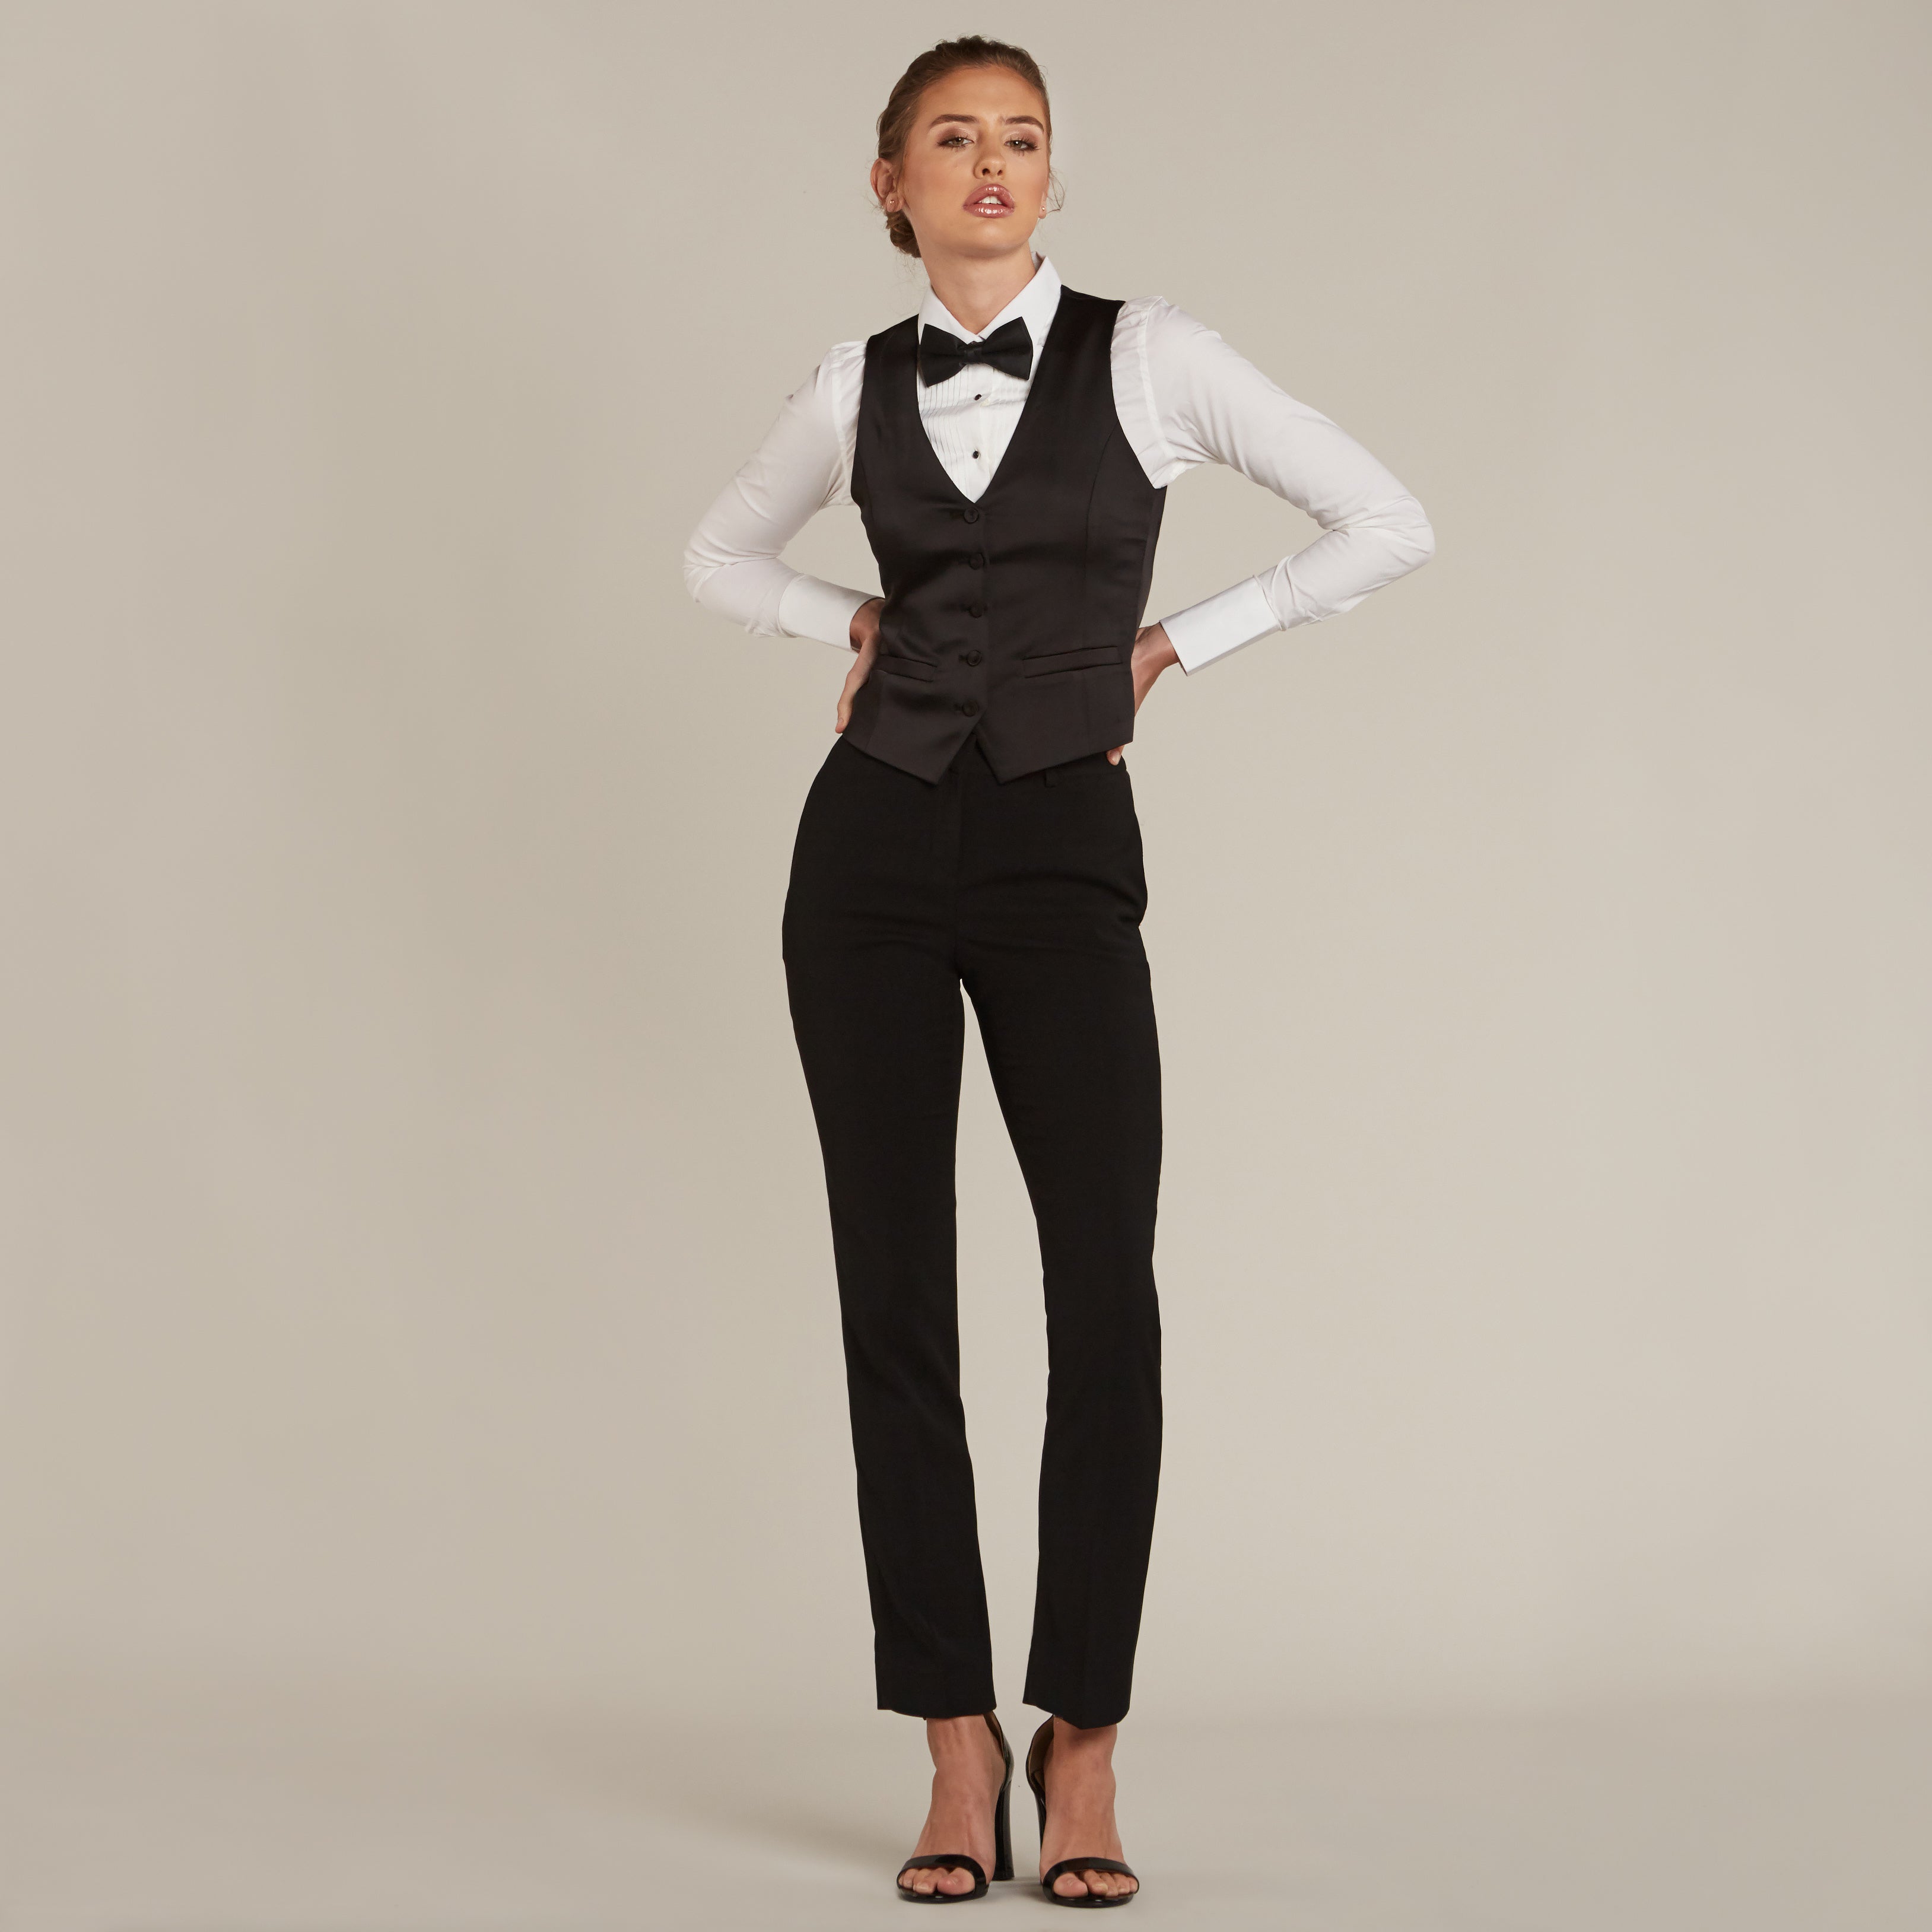 Style blog exclusively for tomboys! | Liza koshy, Womens suit prom, Prom  suit girl